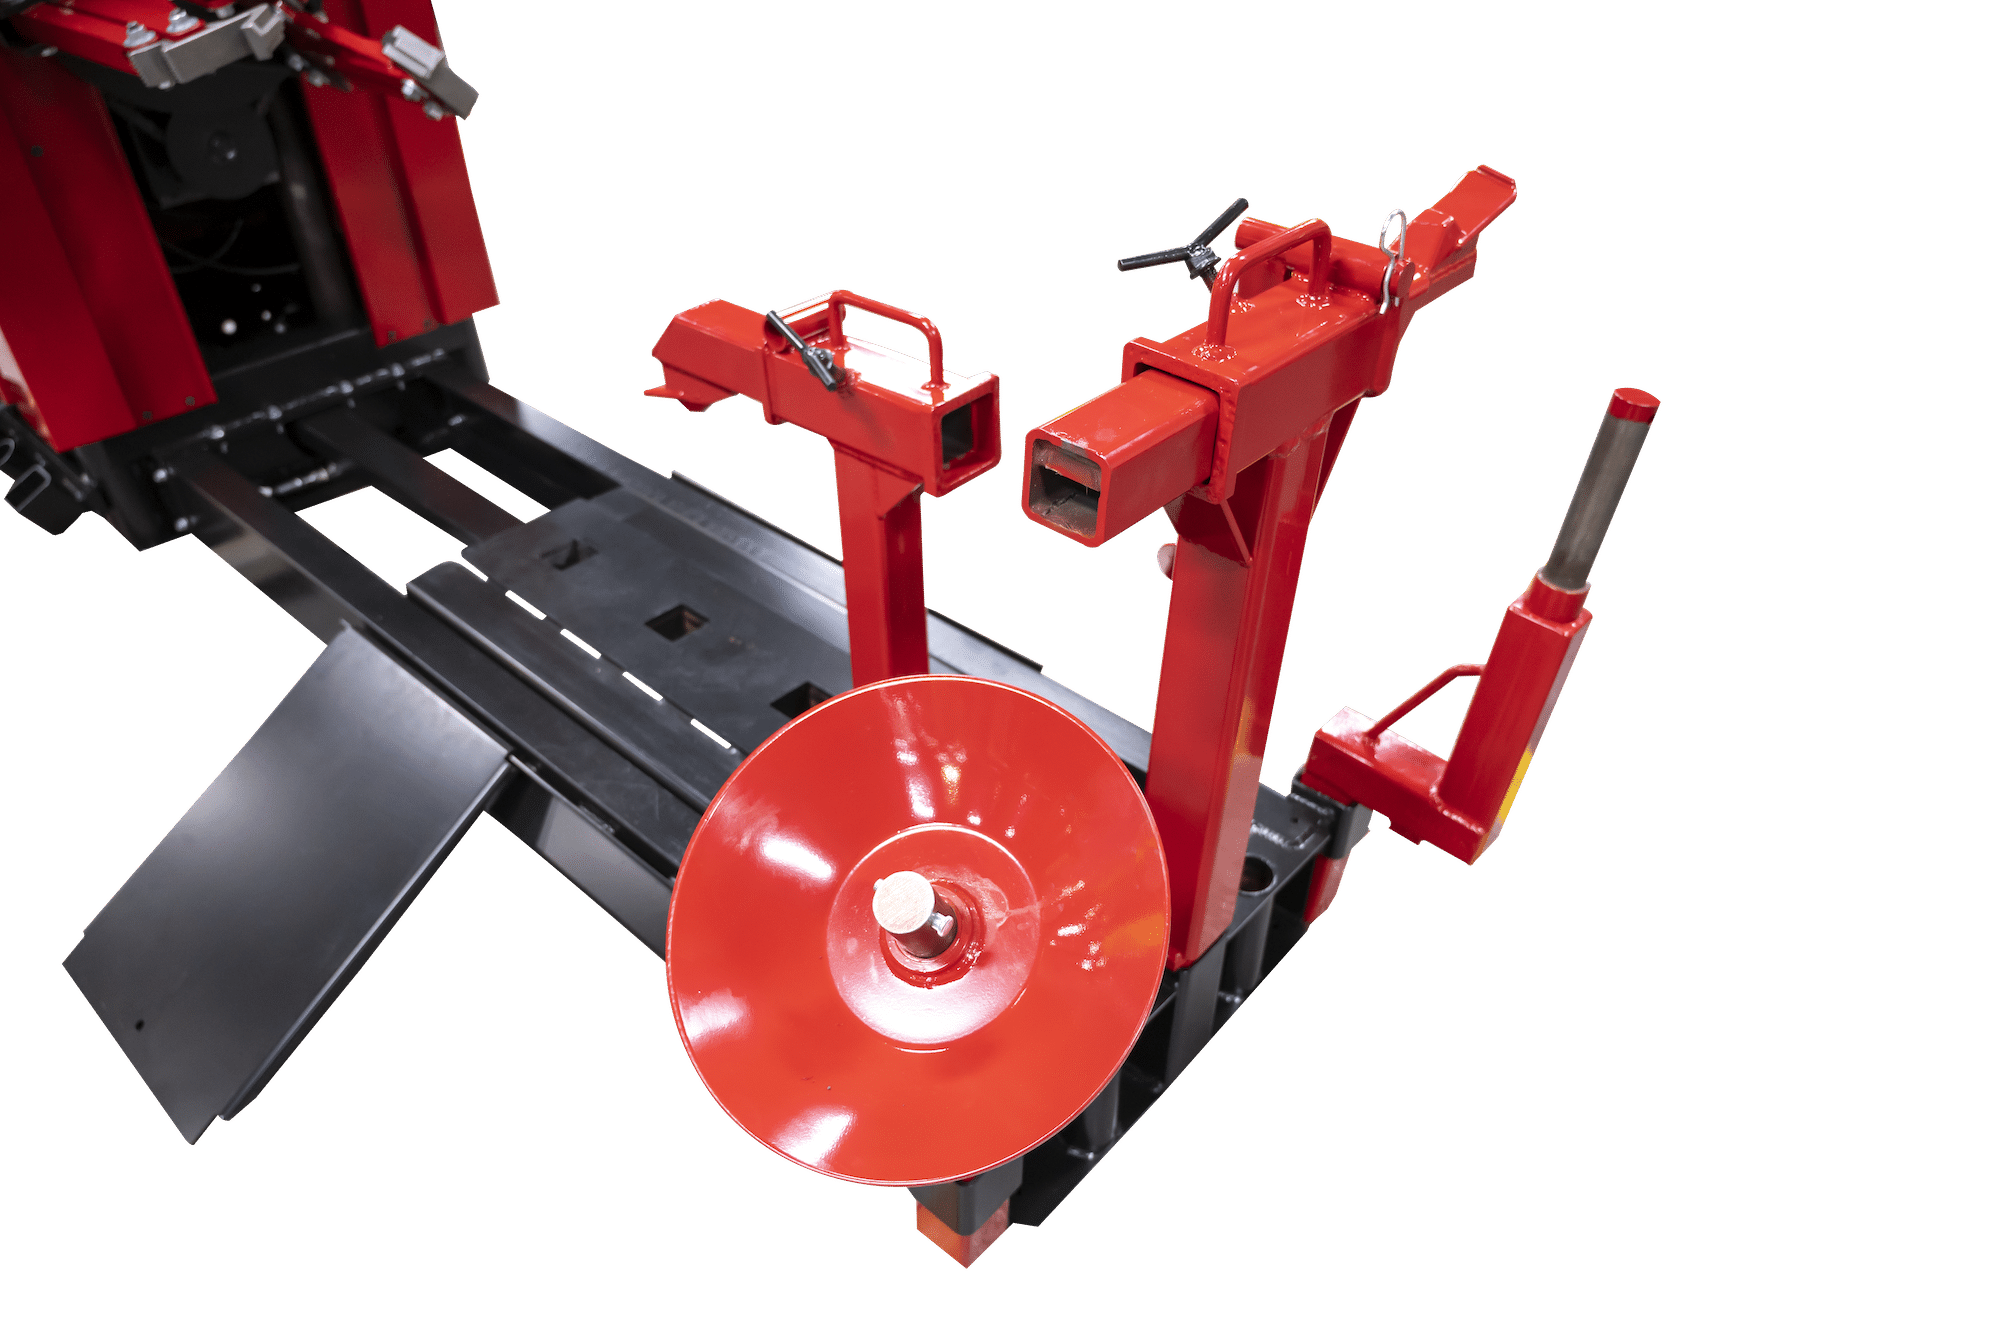 A red disc shaped bead loosener tilted at an angle on a heavy duty tire changer